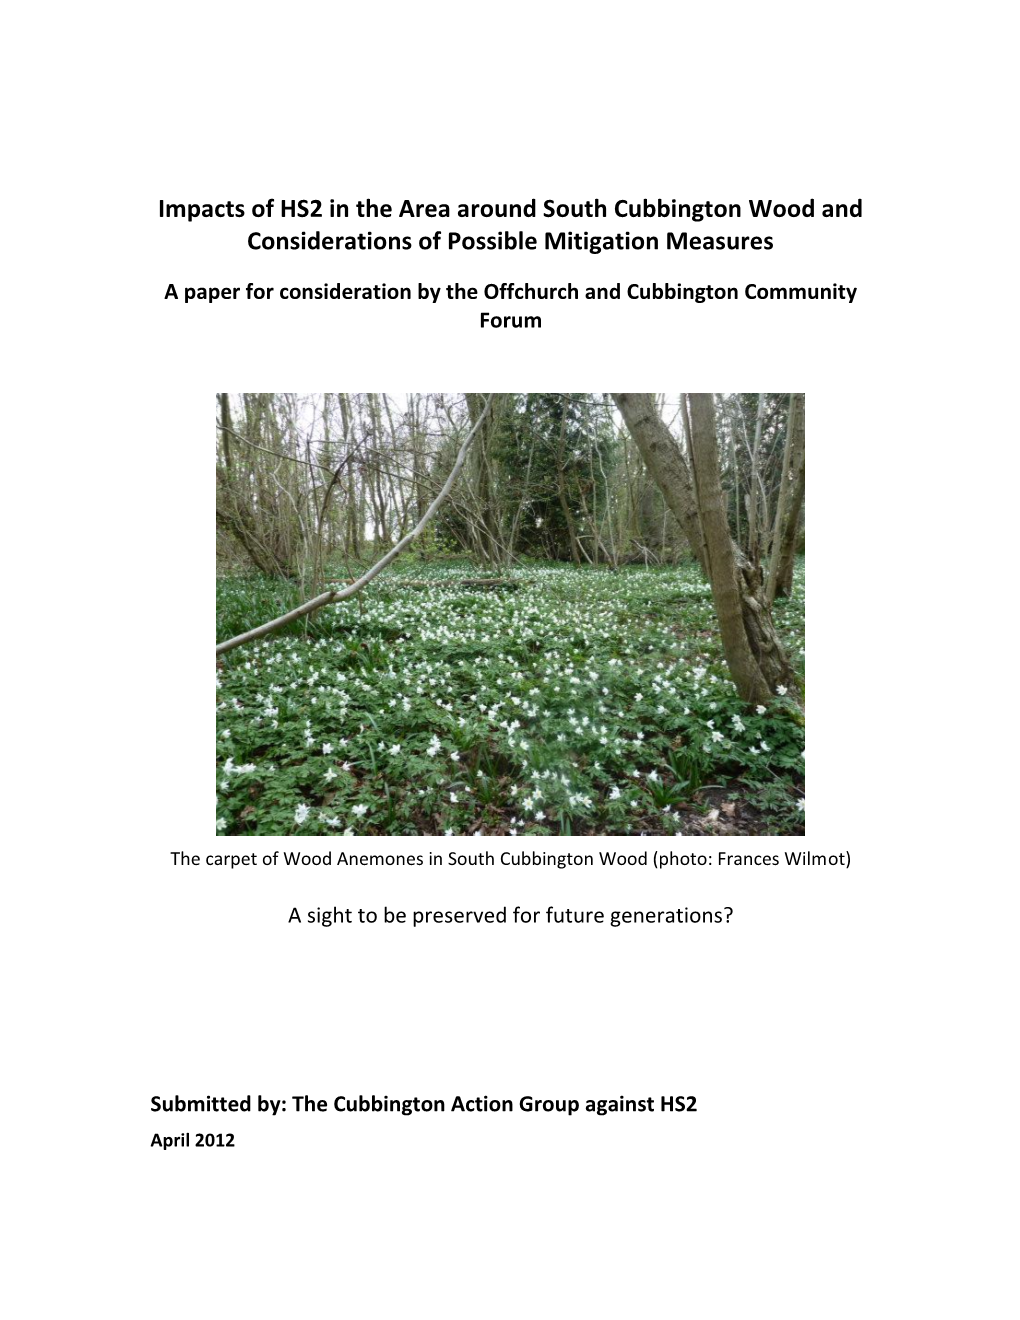 Impacts of HS2 in the Area Around South Cubbington Wood and Considerations of Possible Mitigation Measures